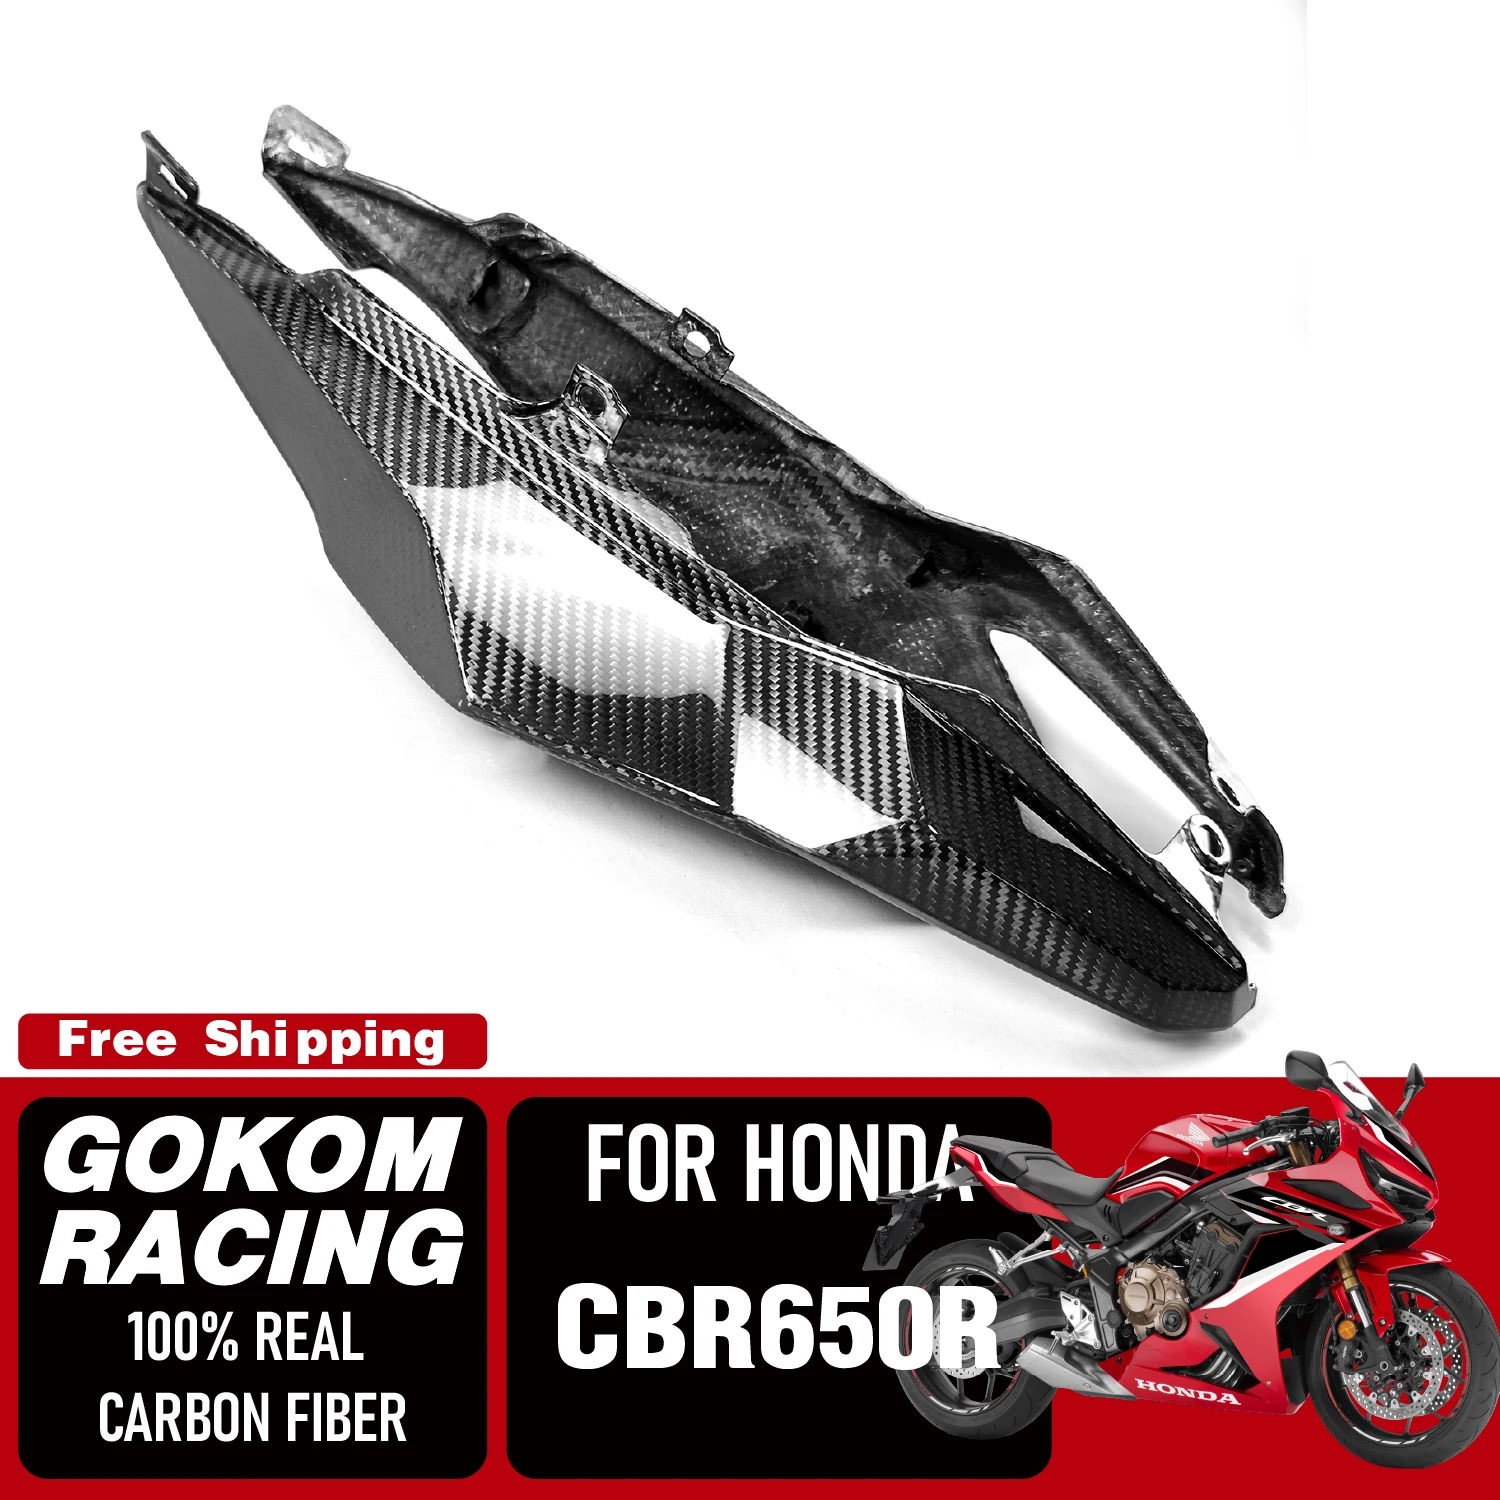 

Gokom Racing For HONDA CBR650R Rear Seat Side Panels GUARD COVER COWLING FAIRING 100% REAL CARBON FIBER MOTORCYCLE ACCESSORIES